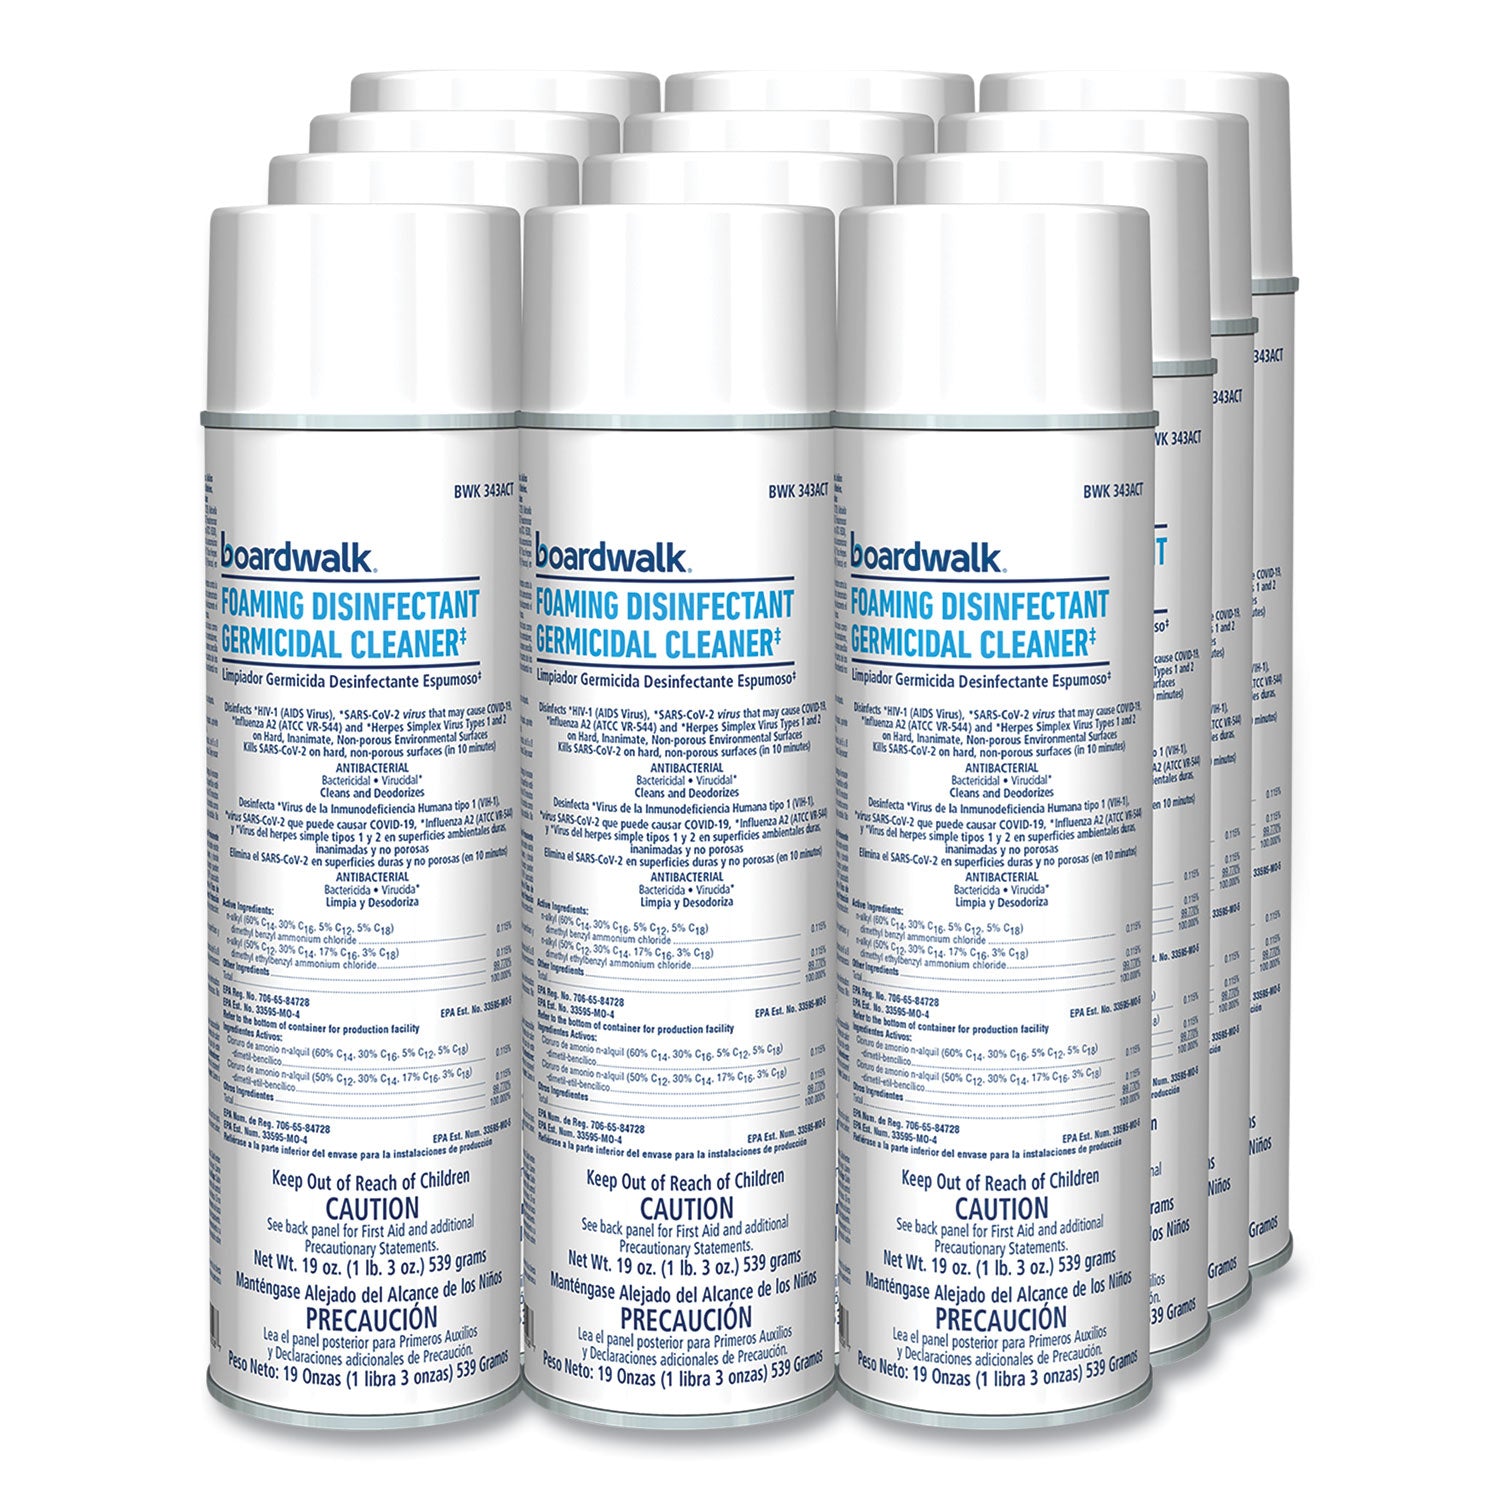 foaming-disinfectant-germicidal-cleaner-flowery-scent-19-oz-aerosol-can-12-carton_bwk343act - 3